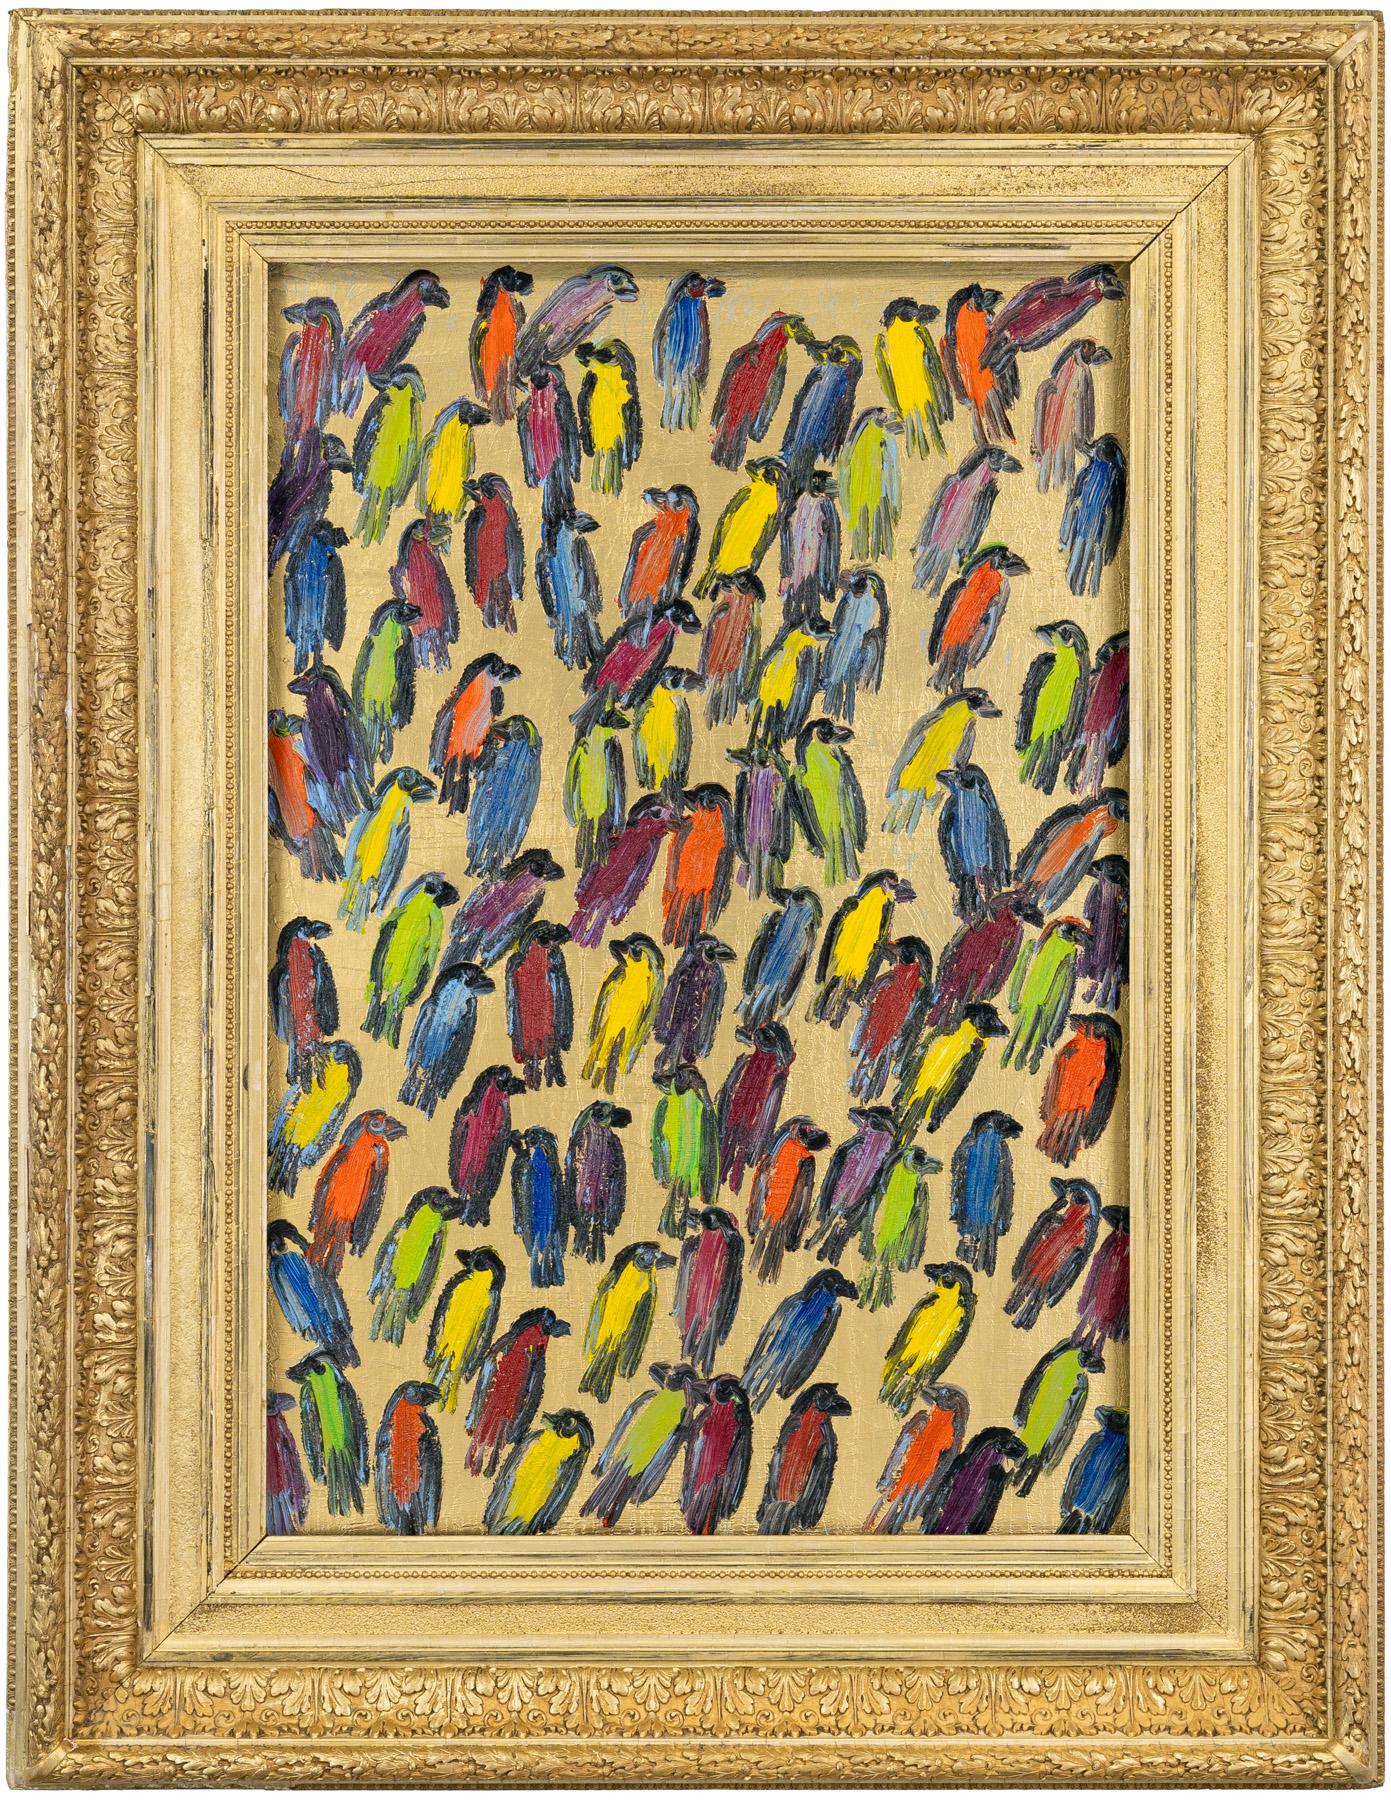 Hunt Slonem "Finches Purple Whydah" Multicolored Birds on Gold metallic background. 
Multicolored Finches birds on a metallic gold background. Framed in an antique gold frame. 

Unframed: 38 x 27 inches
Framed: 52 x 40 inches
*Painting is framed -